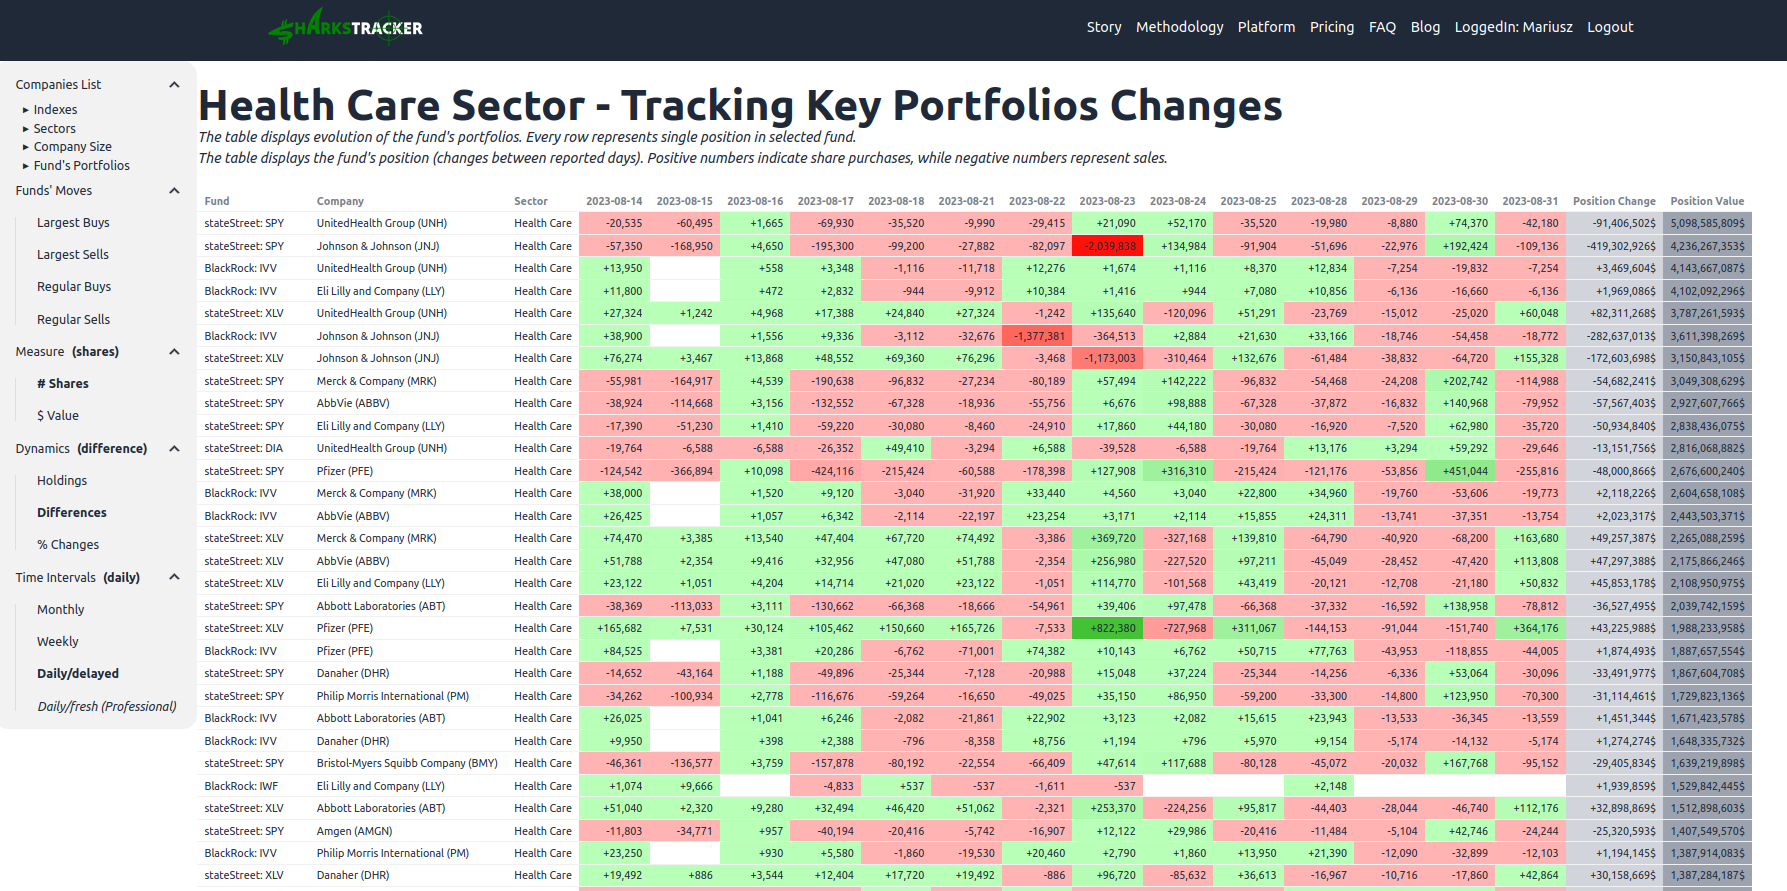 Table containing data about tracking the Health Care sector portfolios